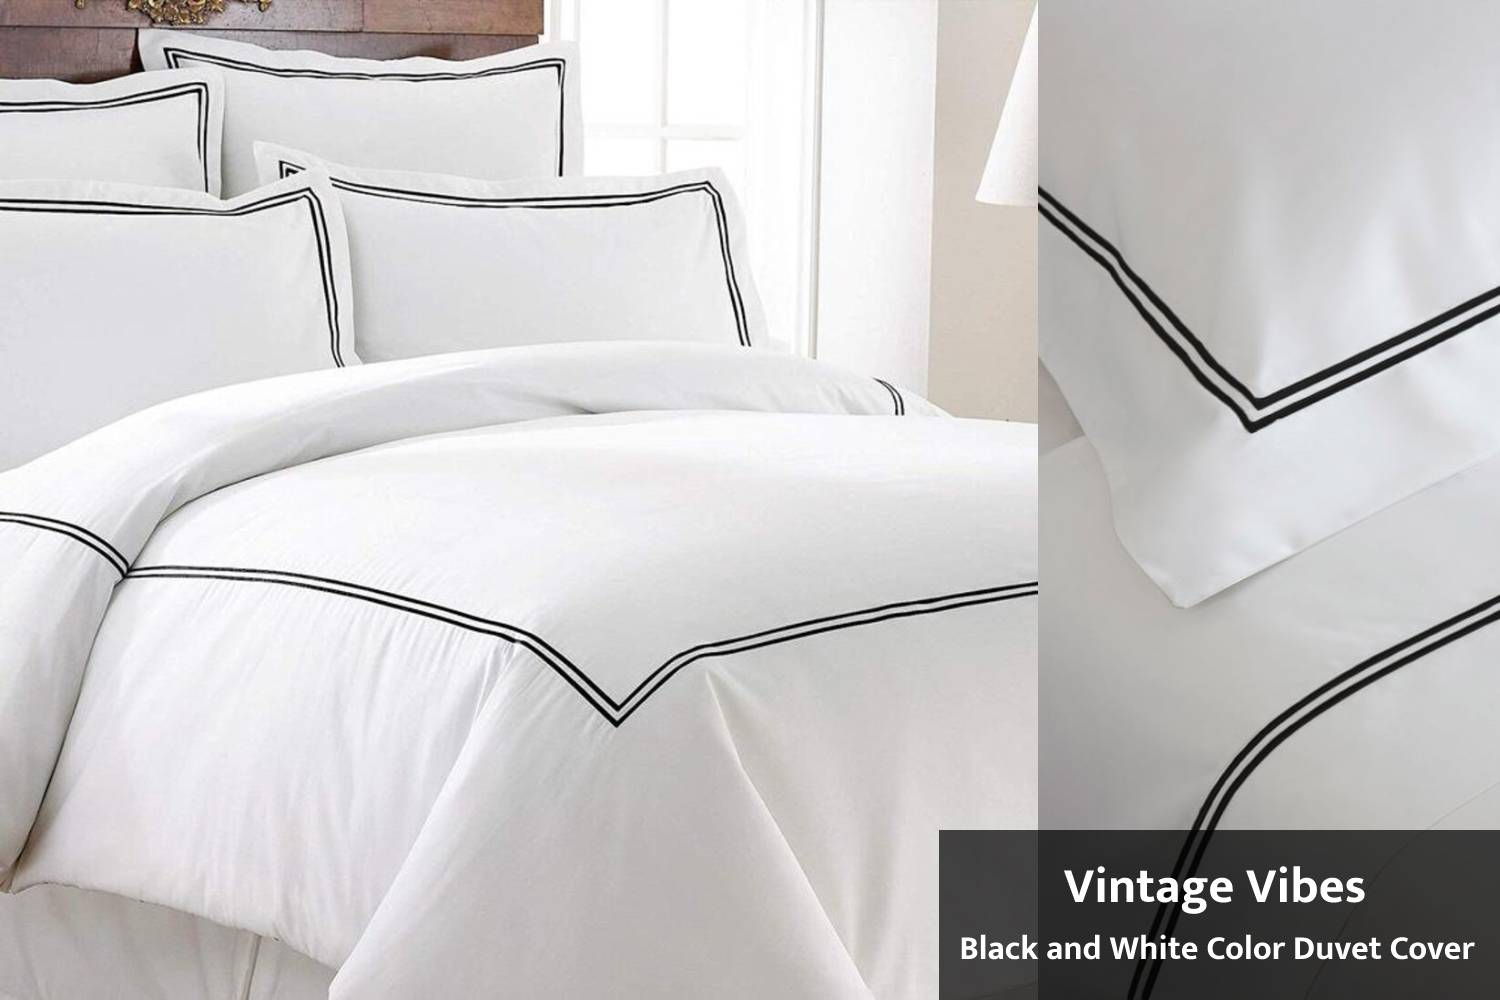 vintage vibes black and white color duvet cover